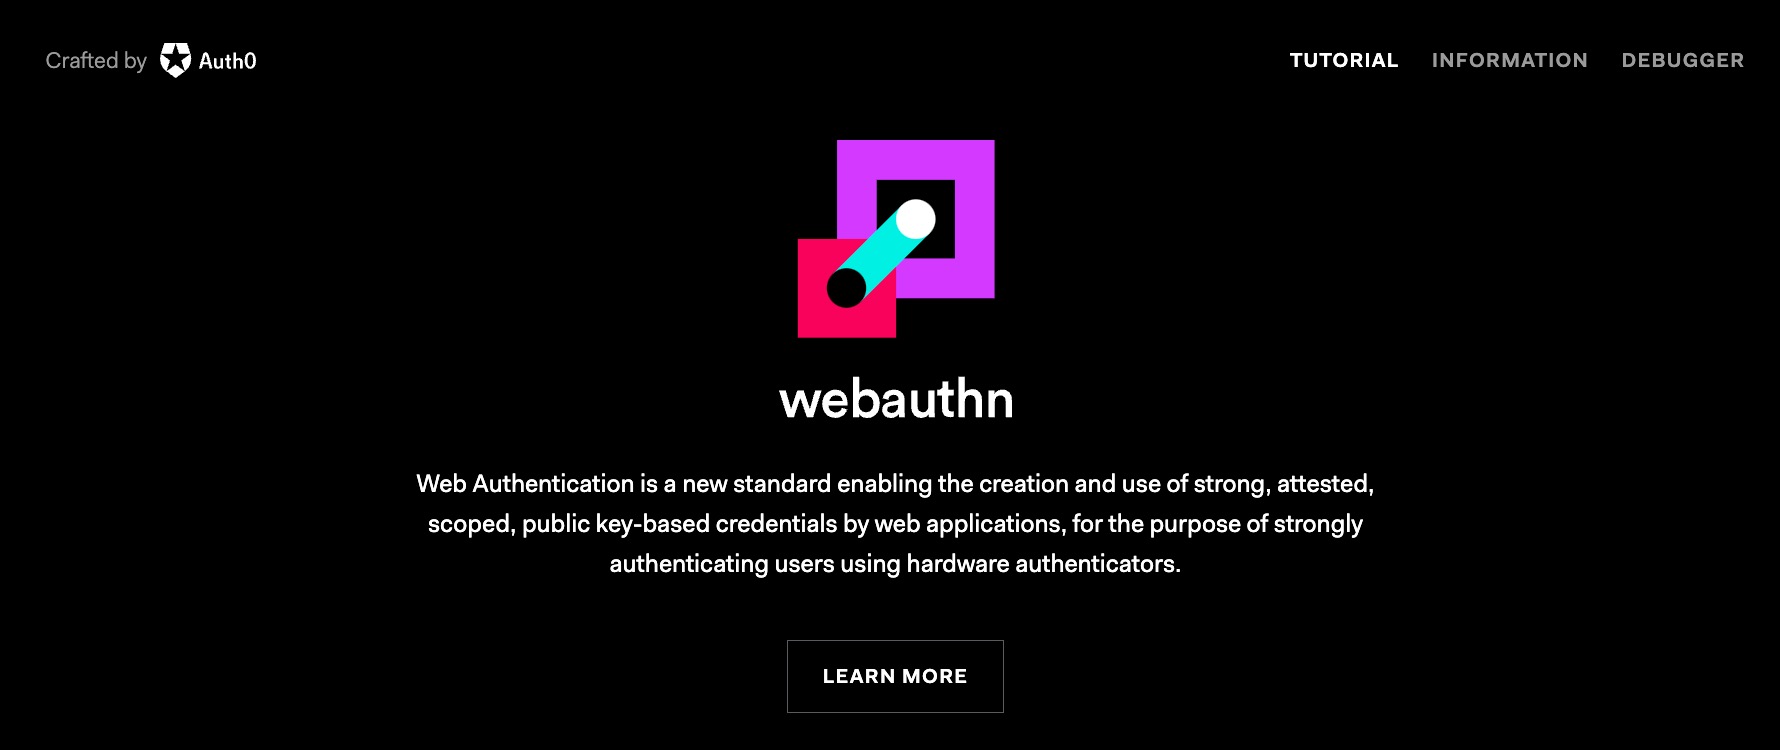 webauthn.me site showing a user name field and a register button